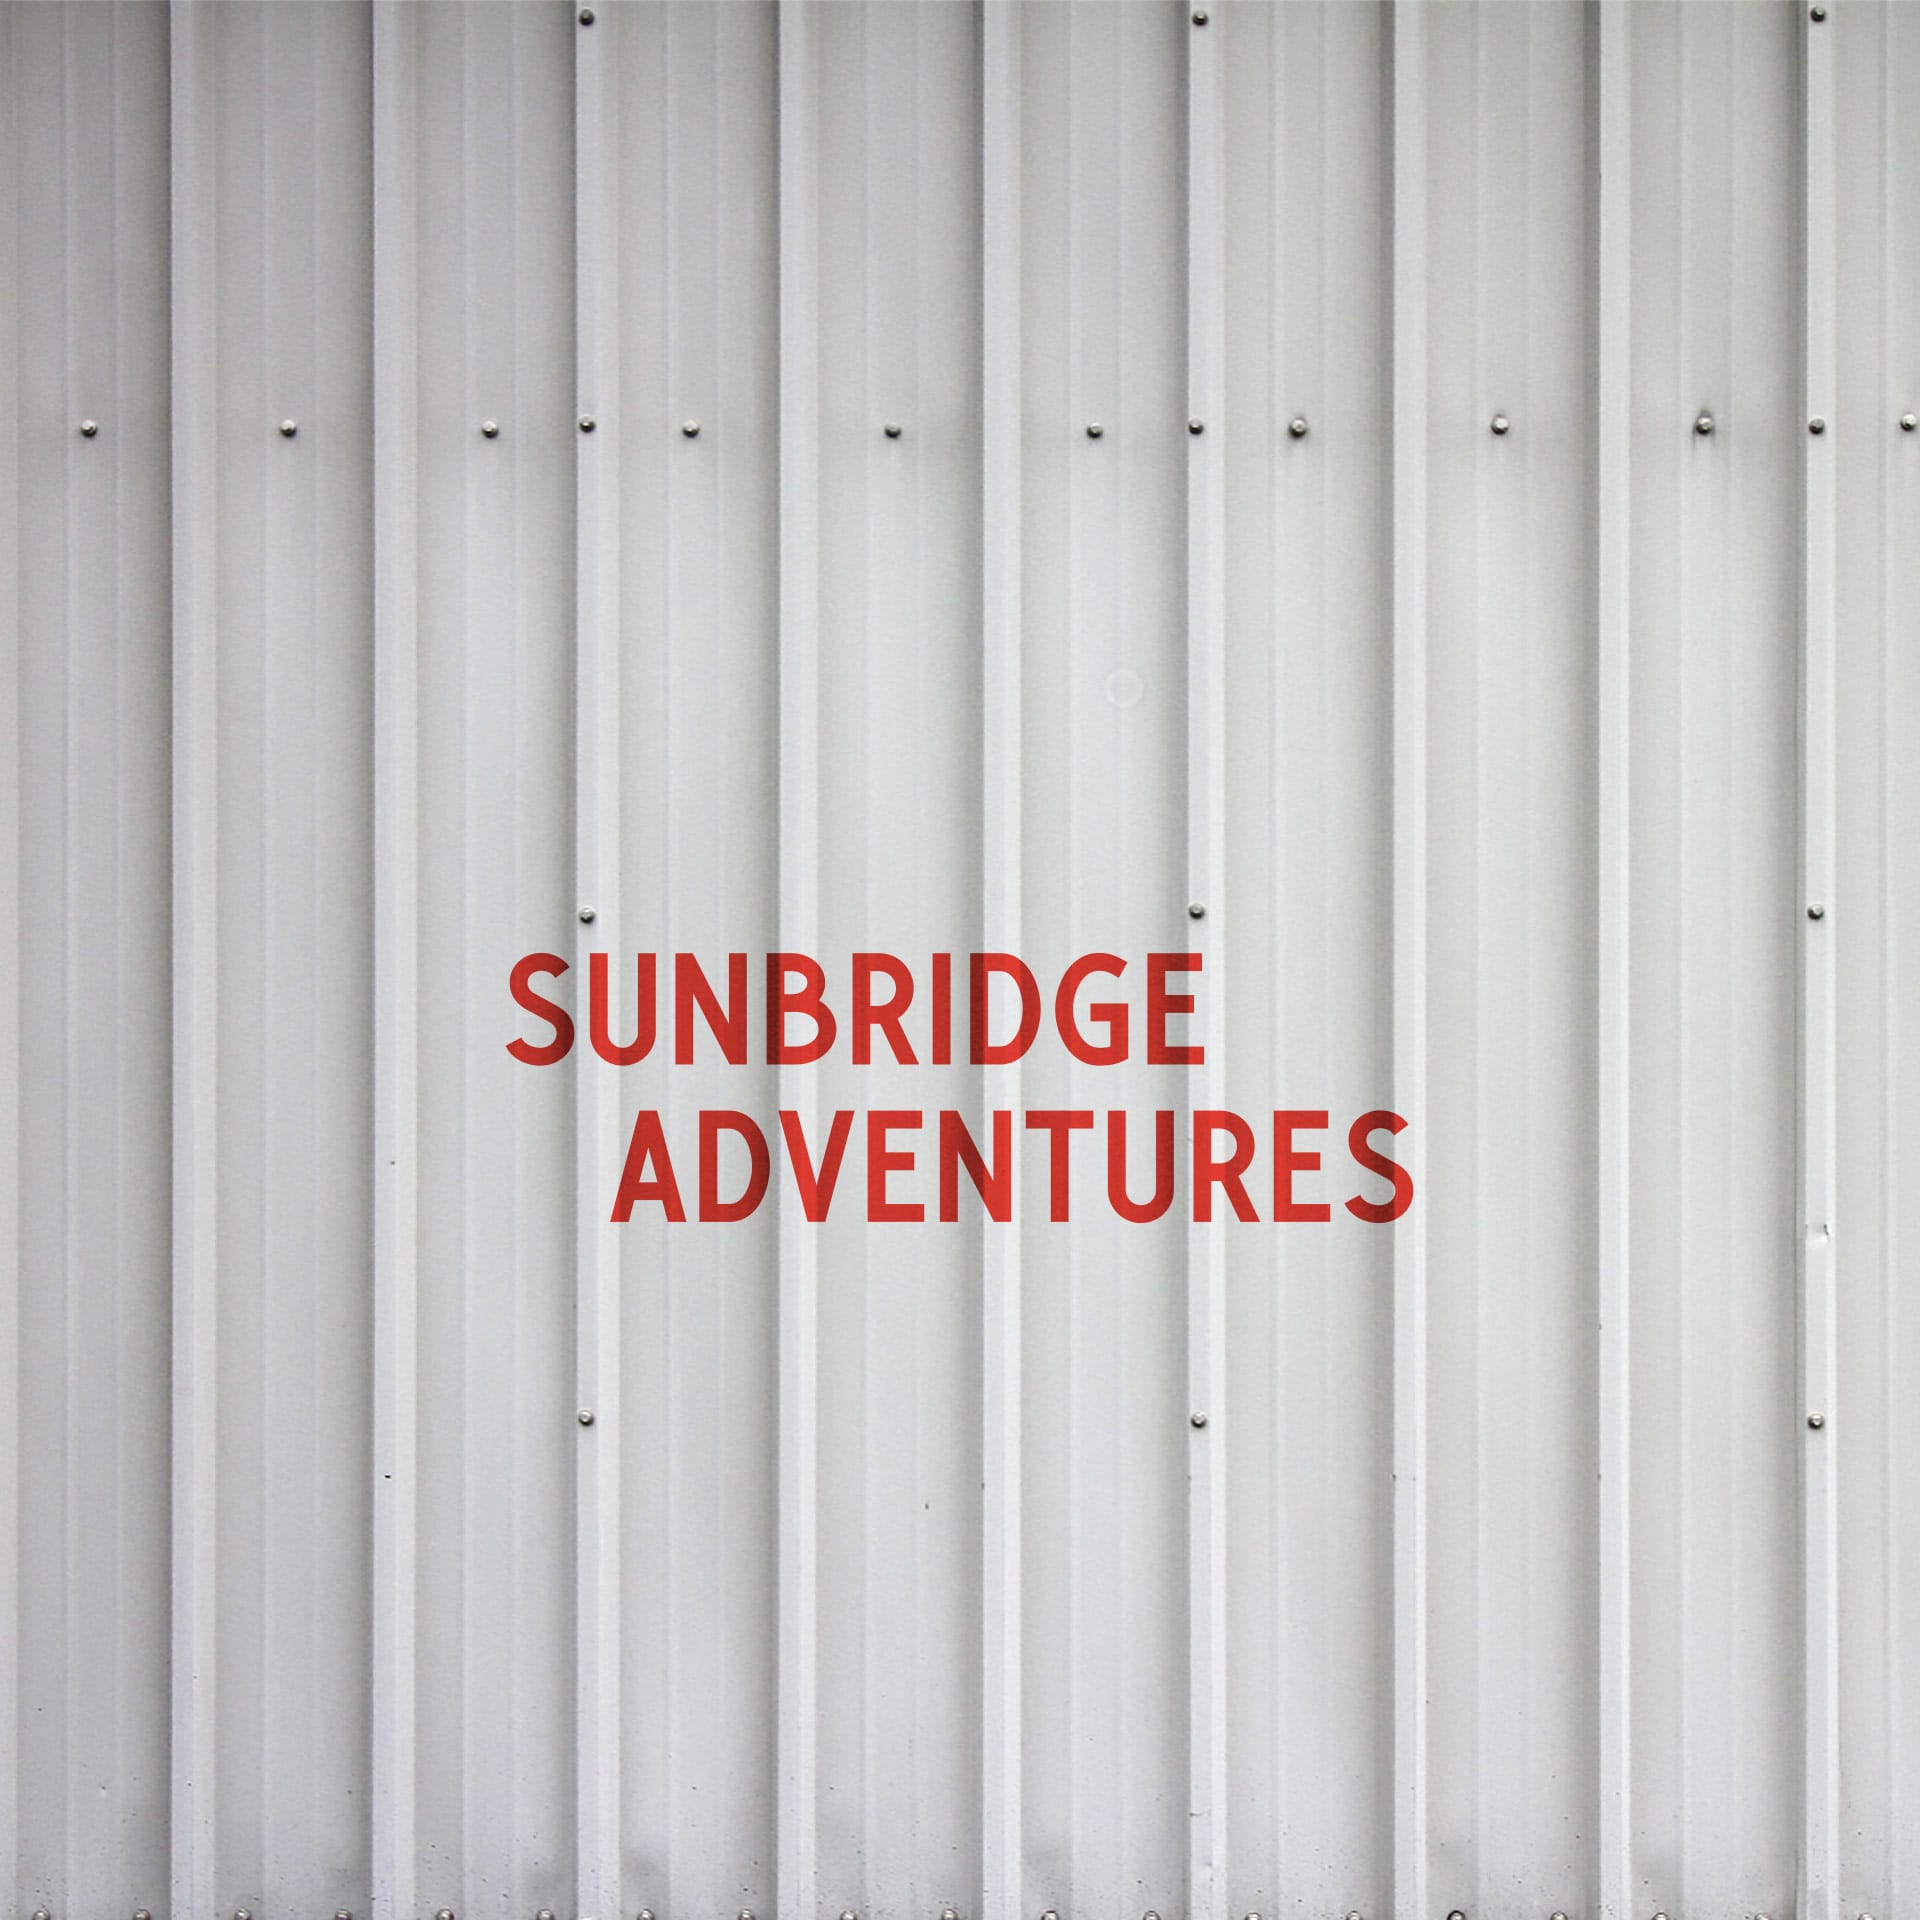 The logo of Sunbridge Adventures painted in red on a light grey metal wall